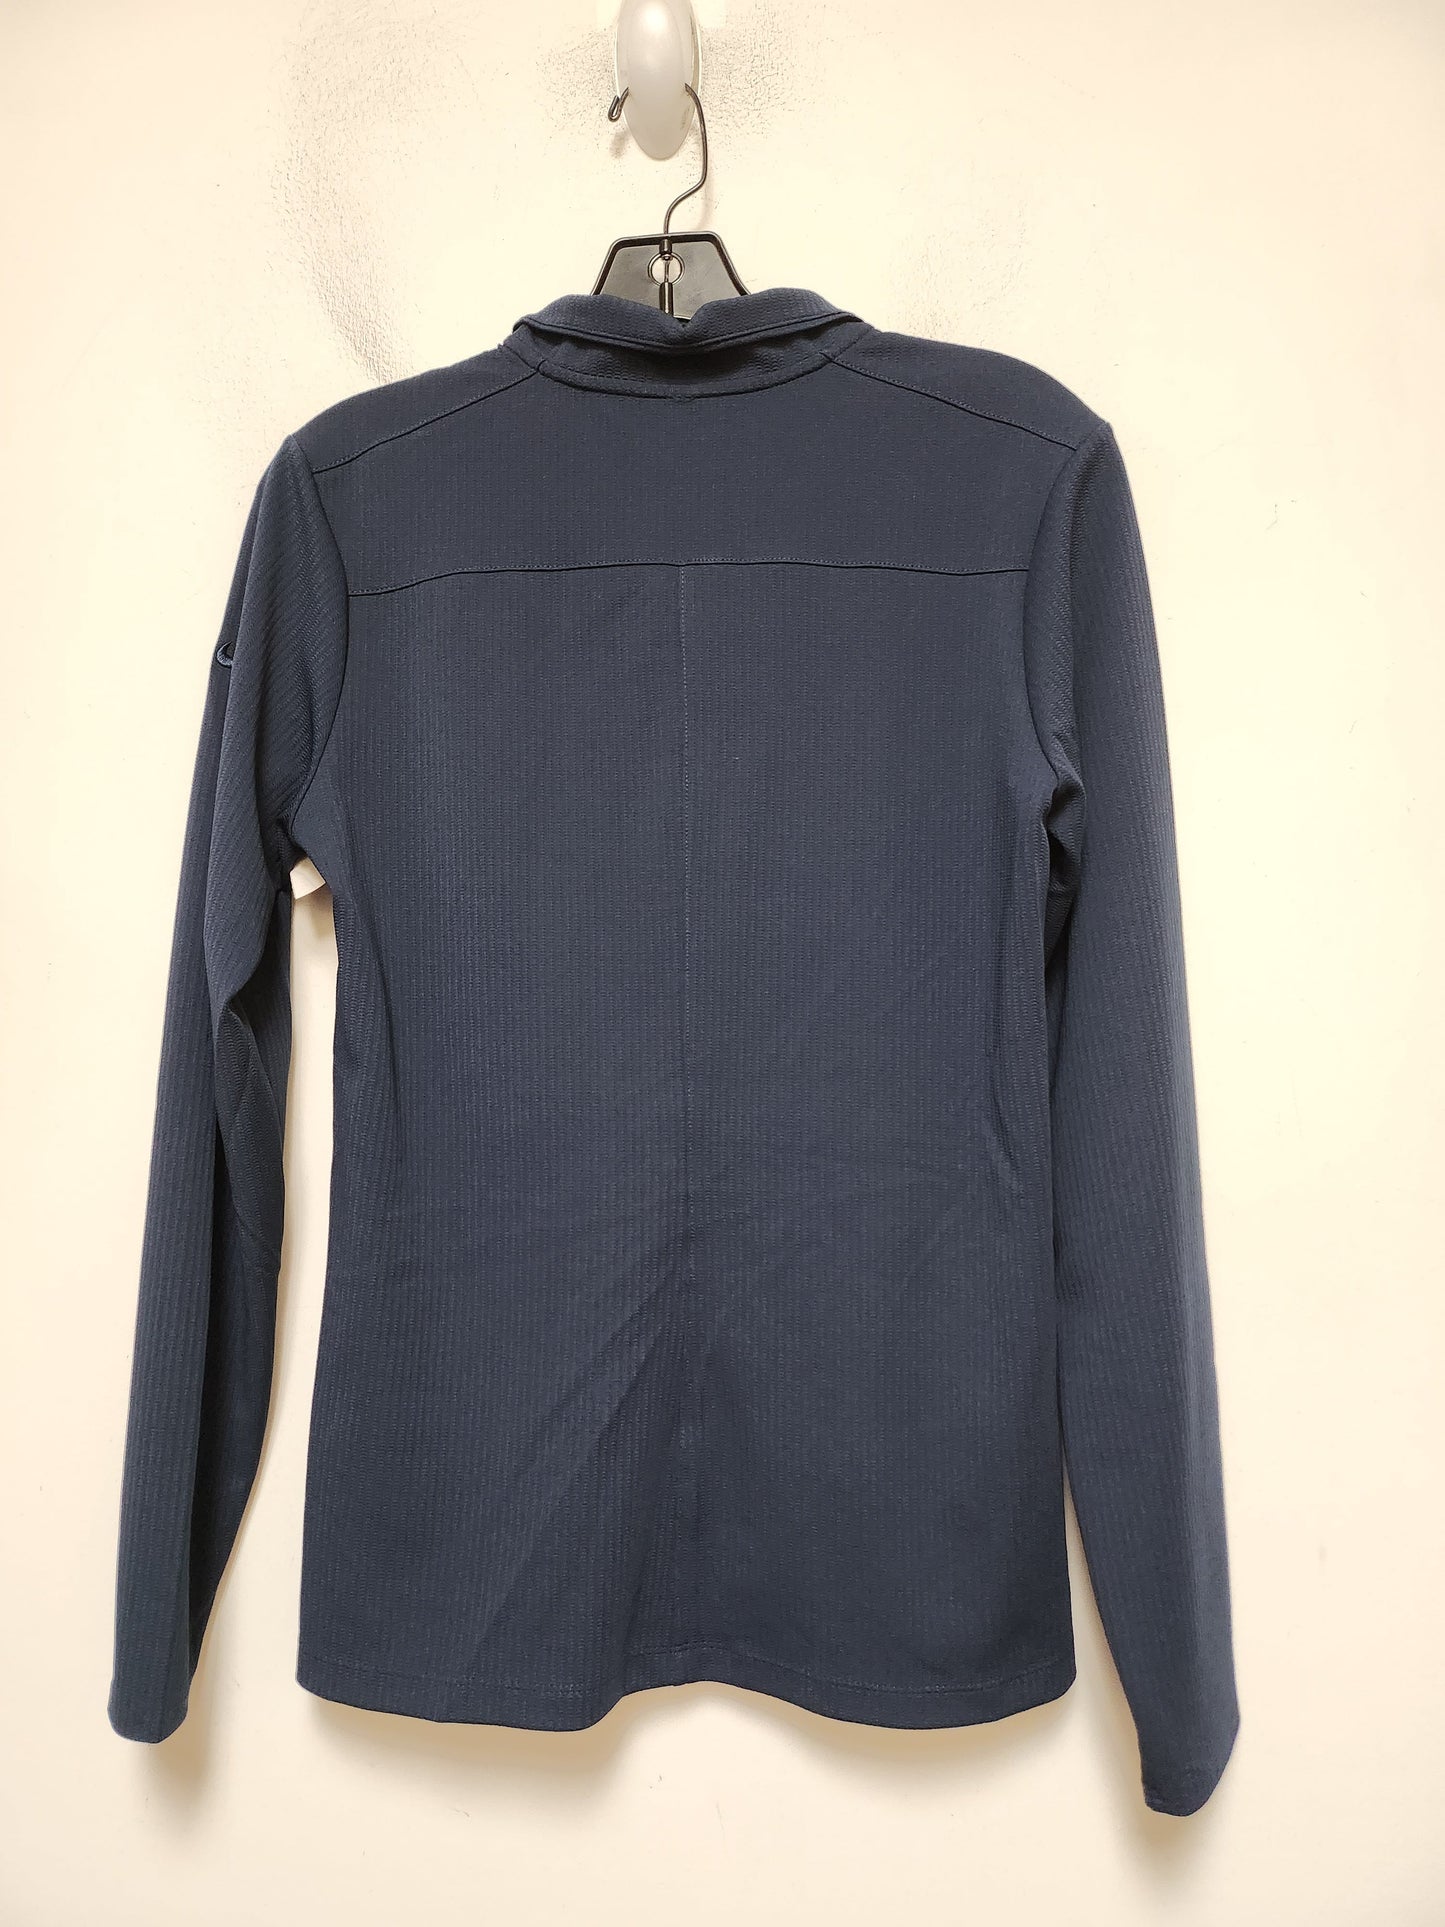 Navy Athletic Top Long Sleeve Collar Nike, Size S